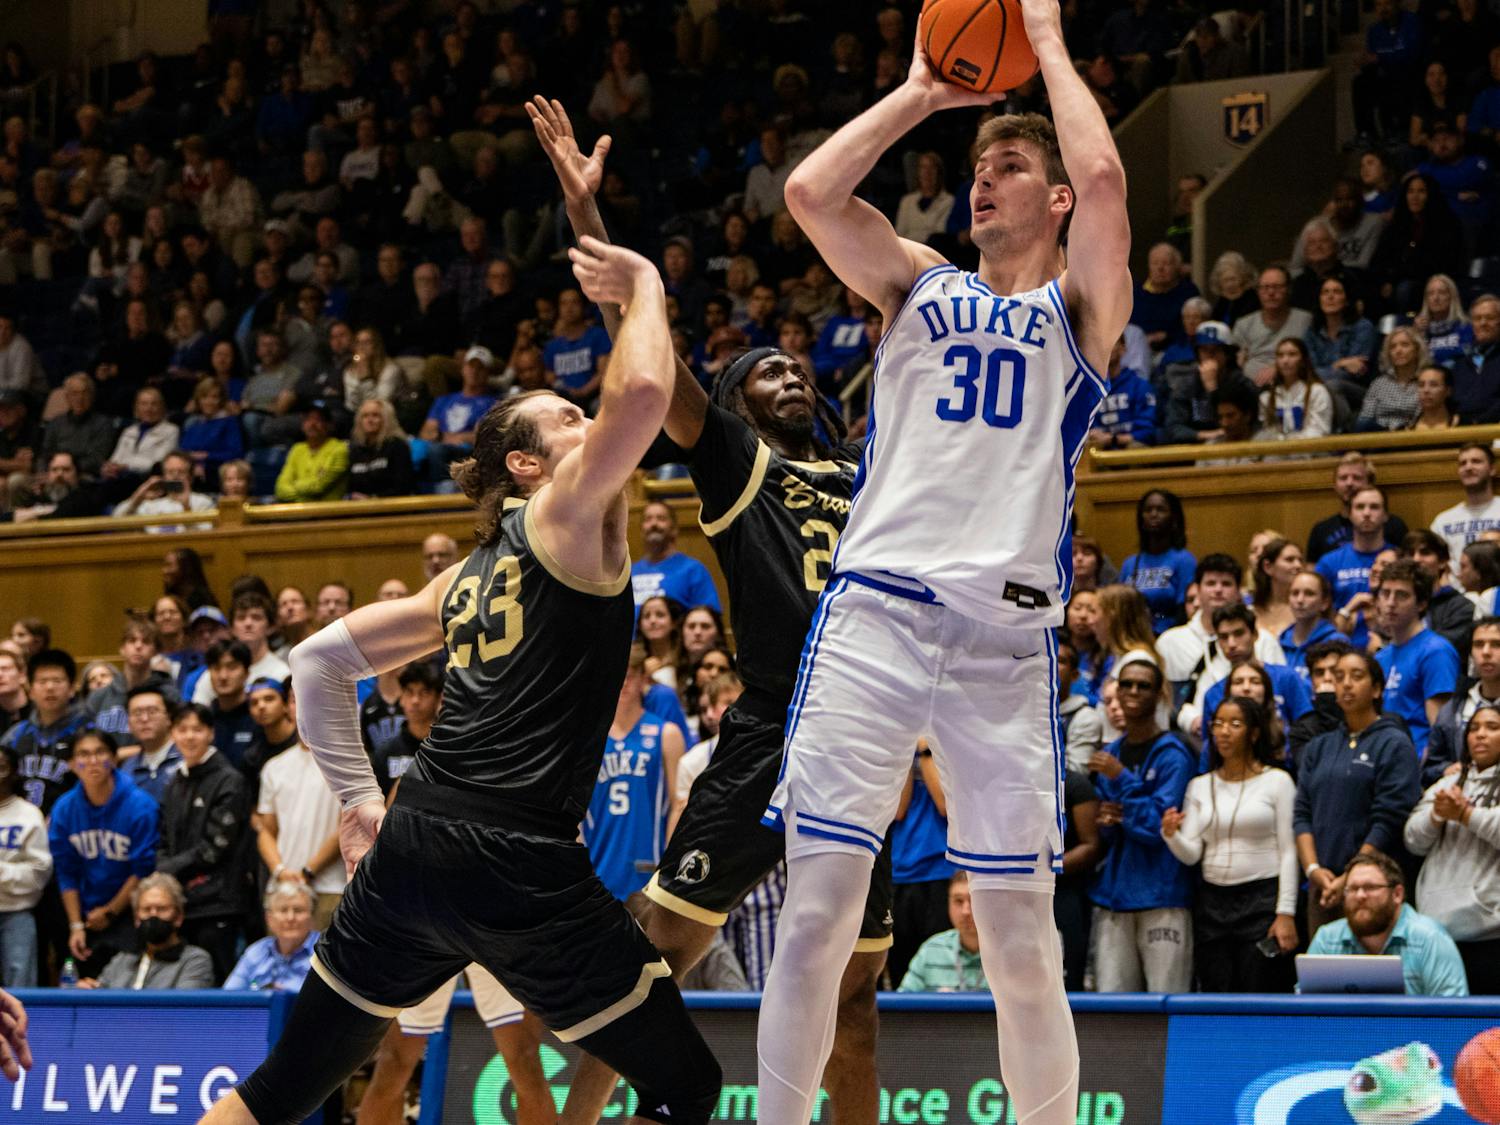 No. 2 Duke men's basketball will look to open its season strong against Dartmouth Monday.